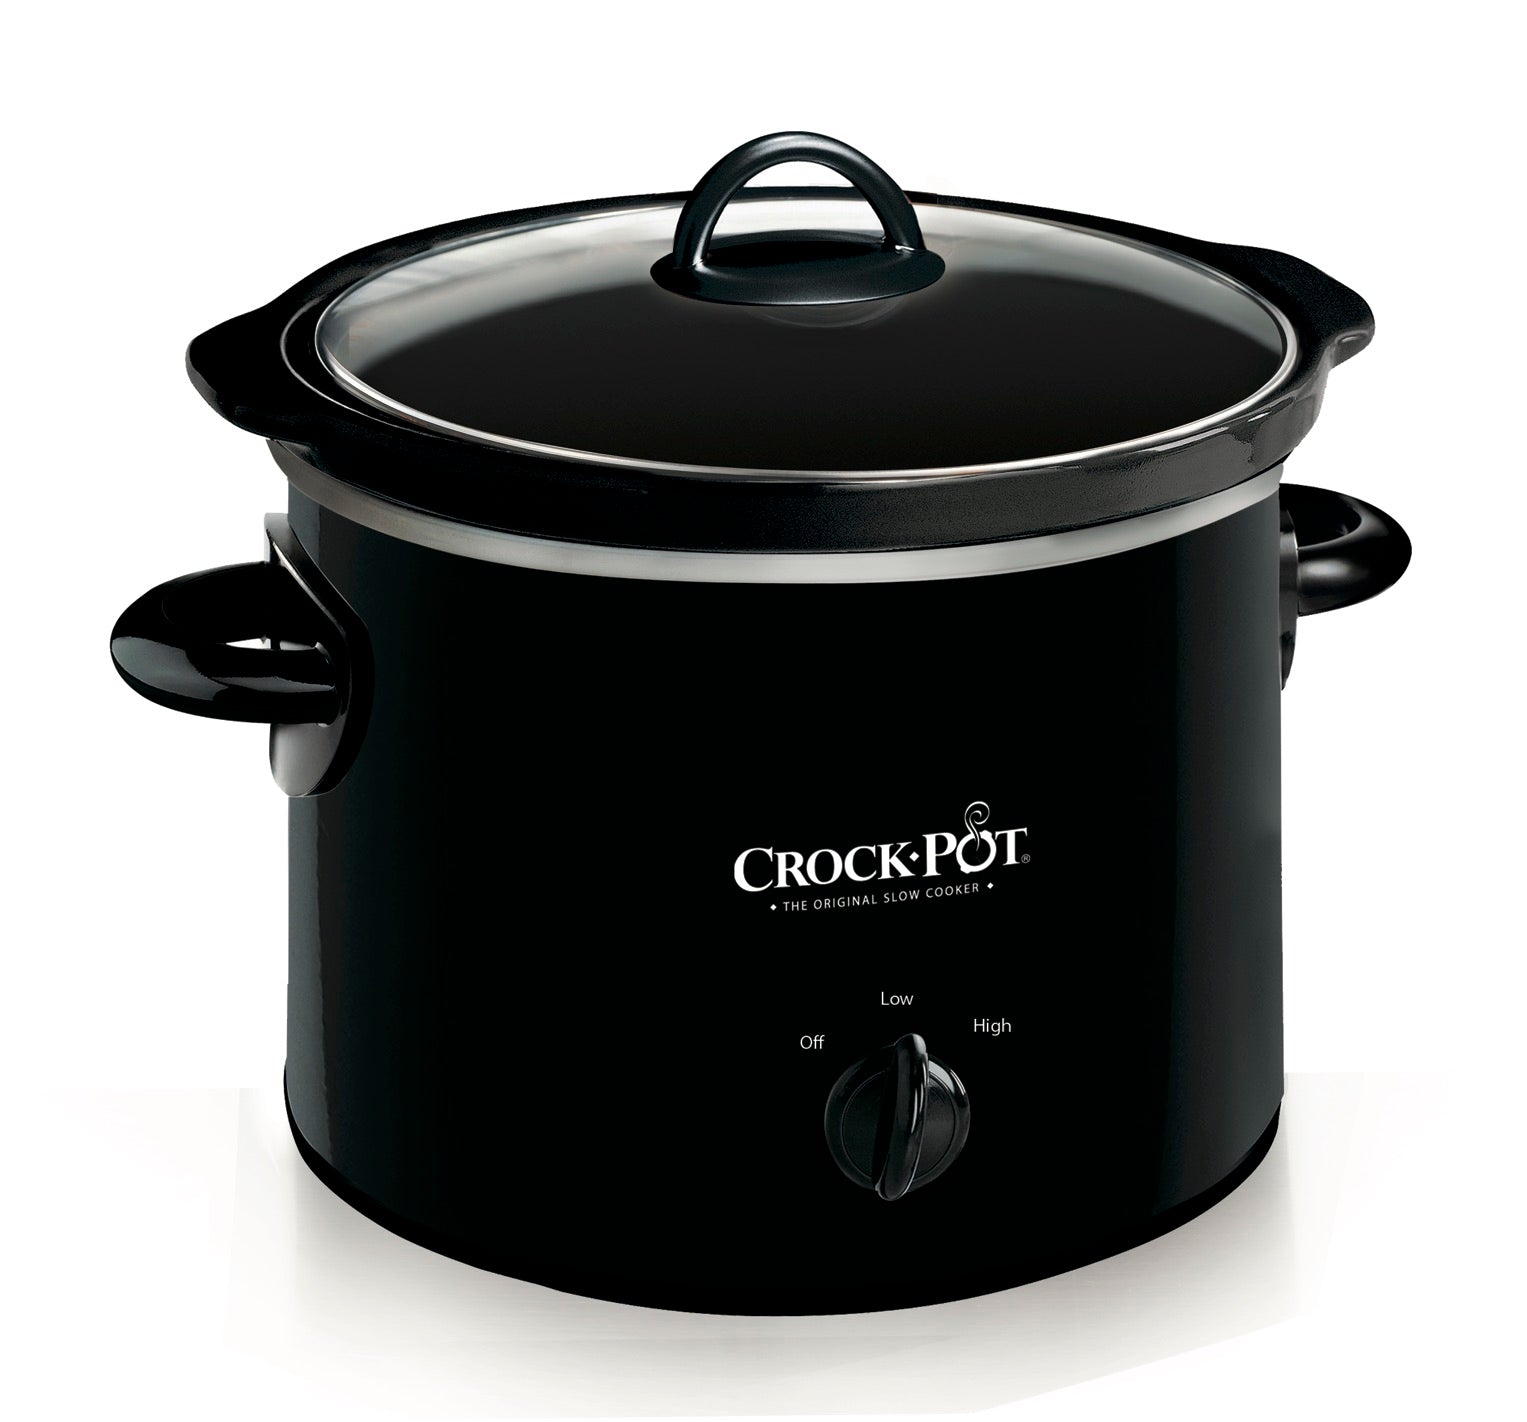 Rival 5-qt Round Programmable Crock Pot in White